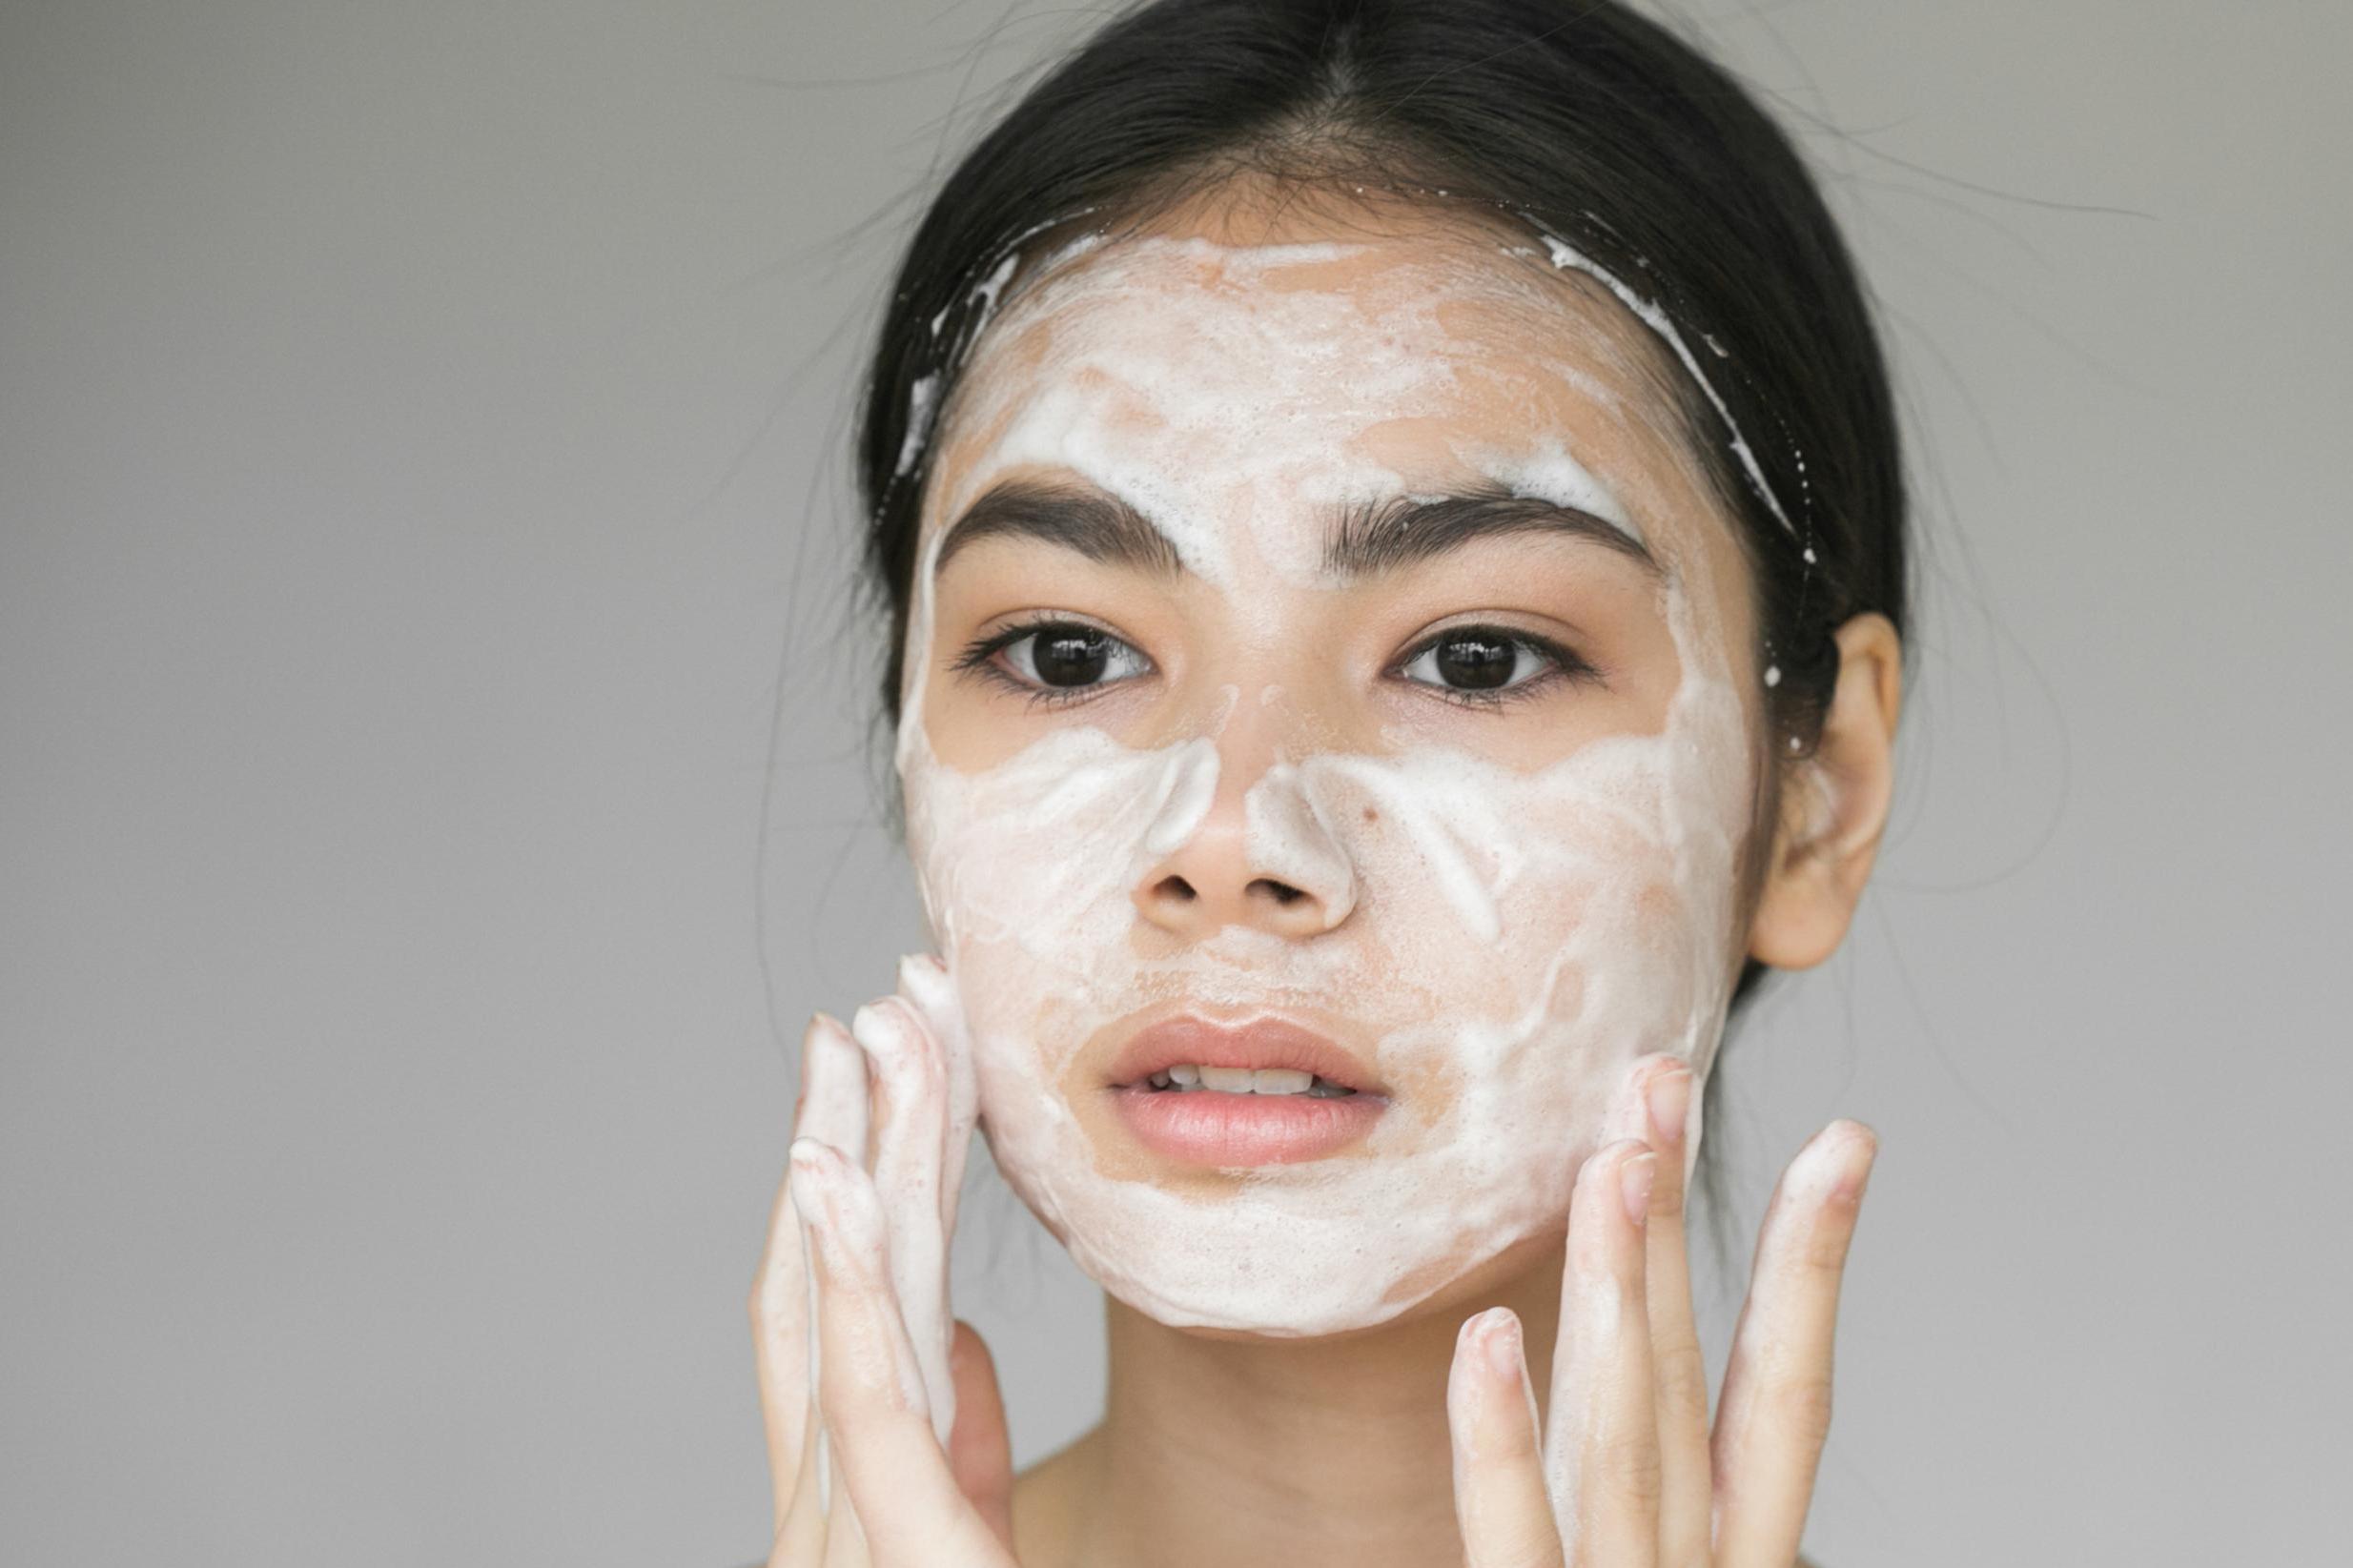 Banish breakouts with our best pick of cleansers for oily skin